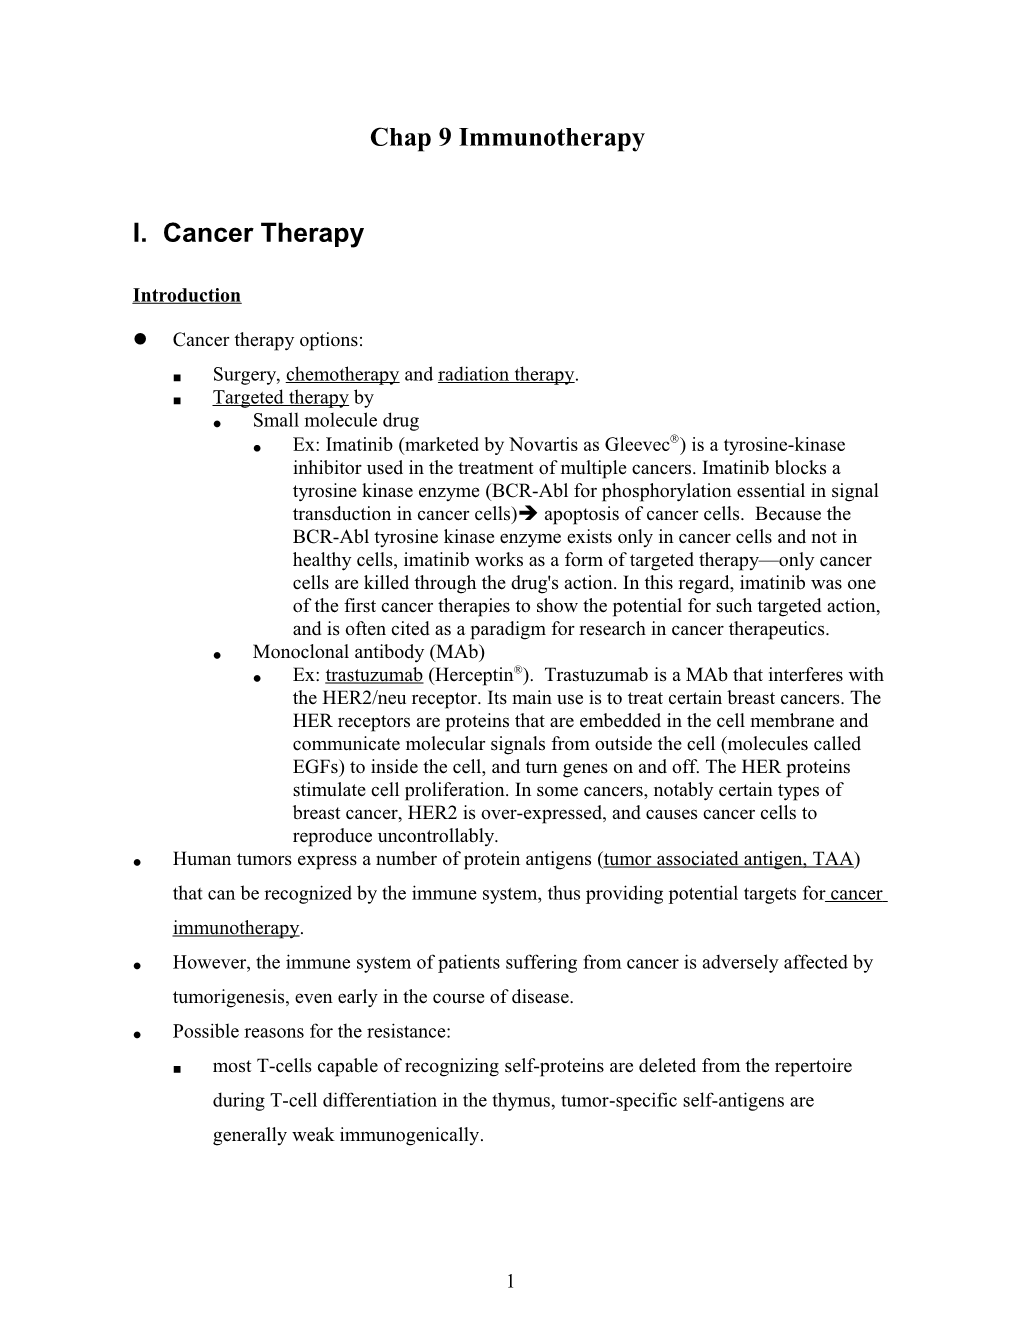 I.Cancer Therapy